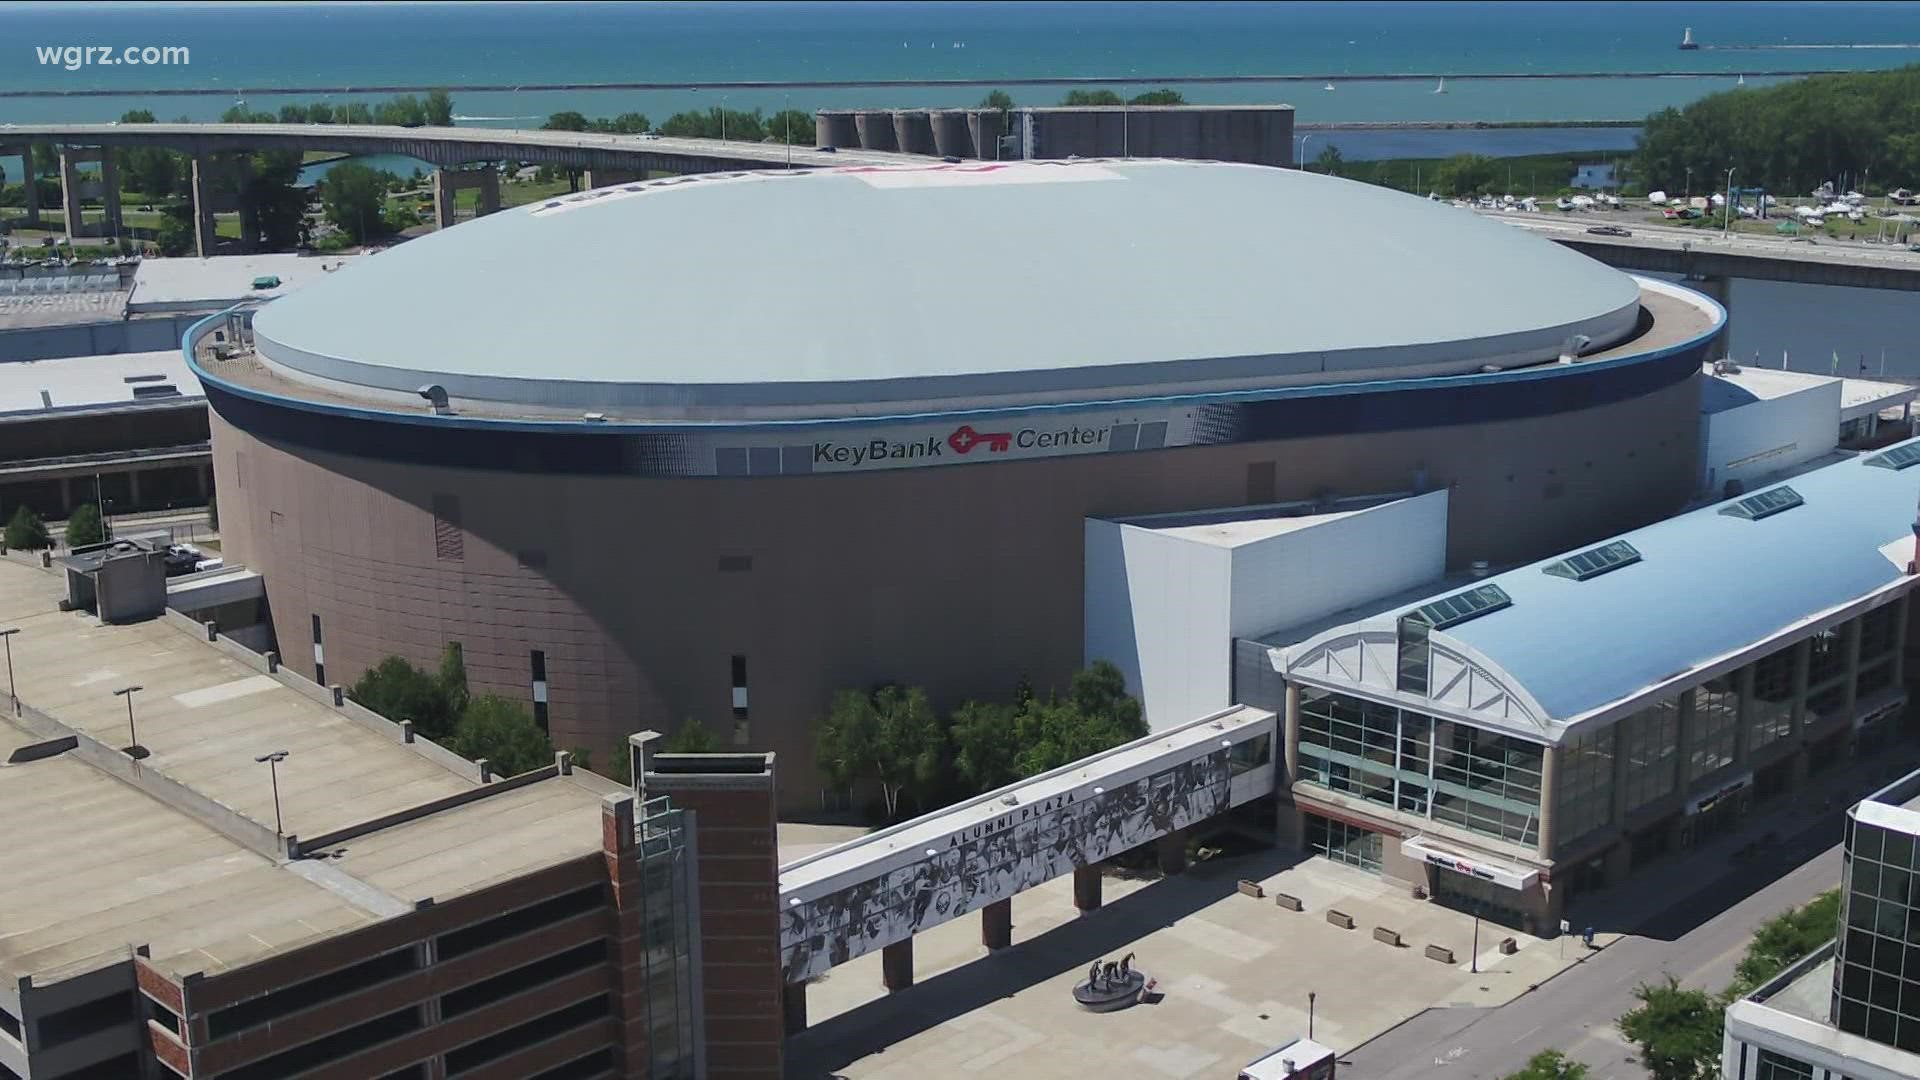 With the conclusion of another first and second round of March Madness in the books, there have been good reviews, but the Keybank Center is still a question mark.